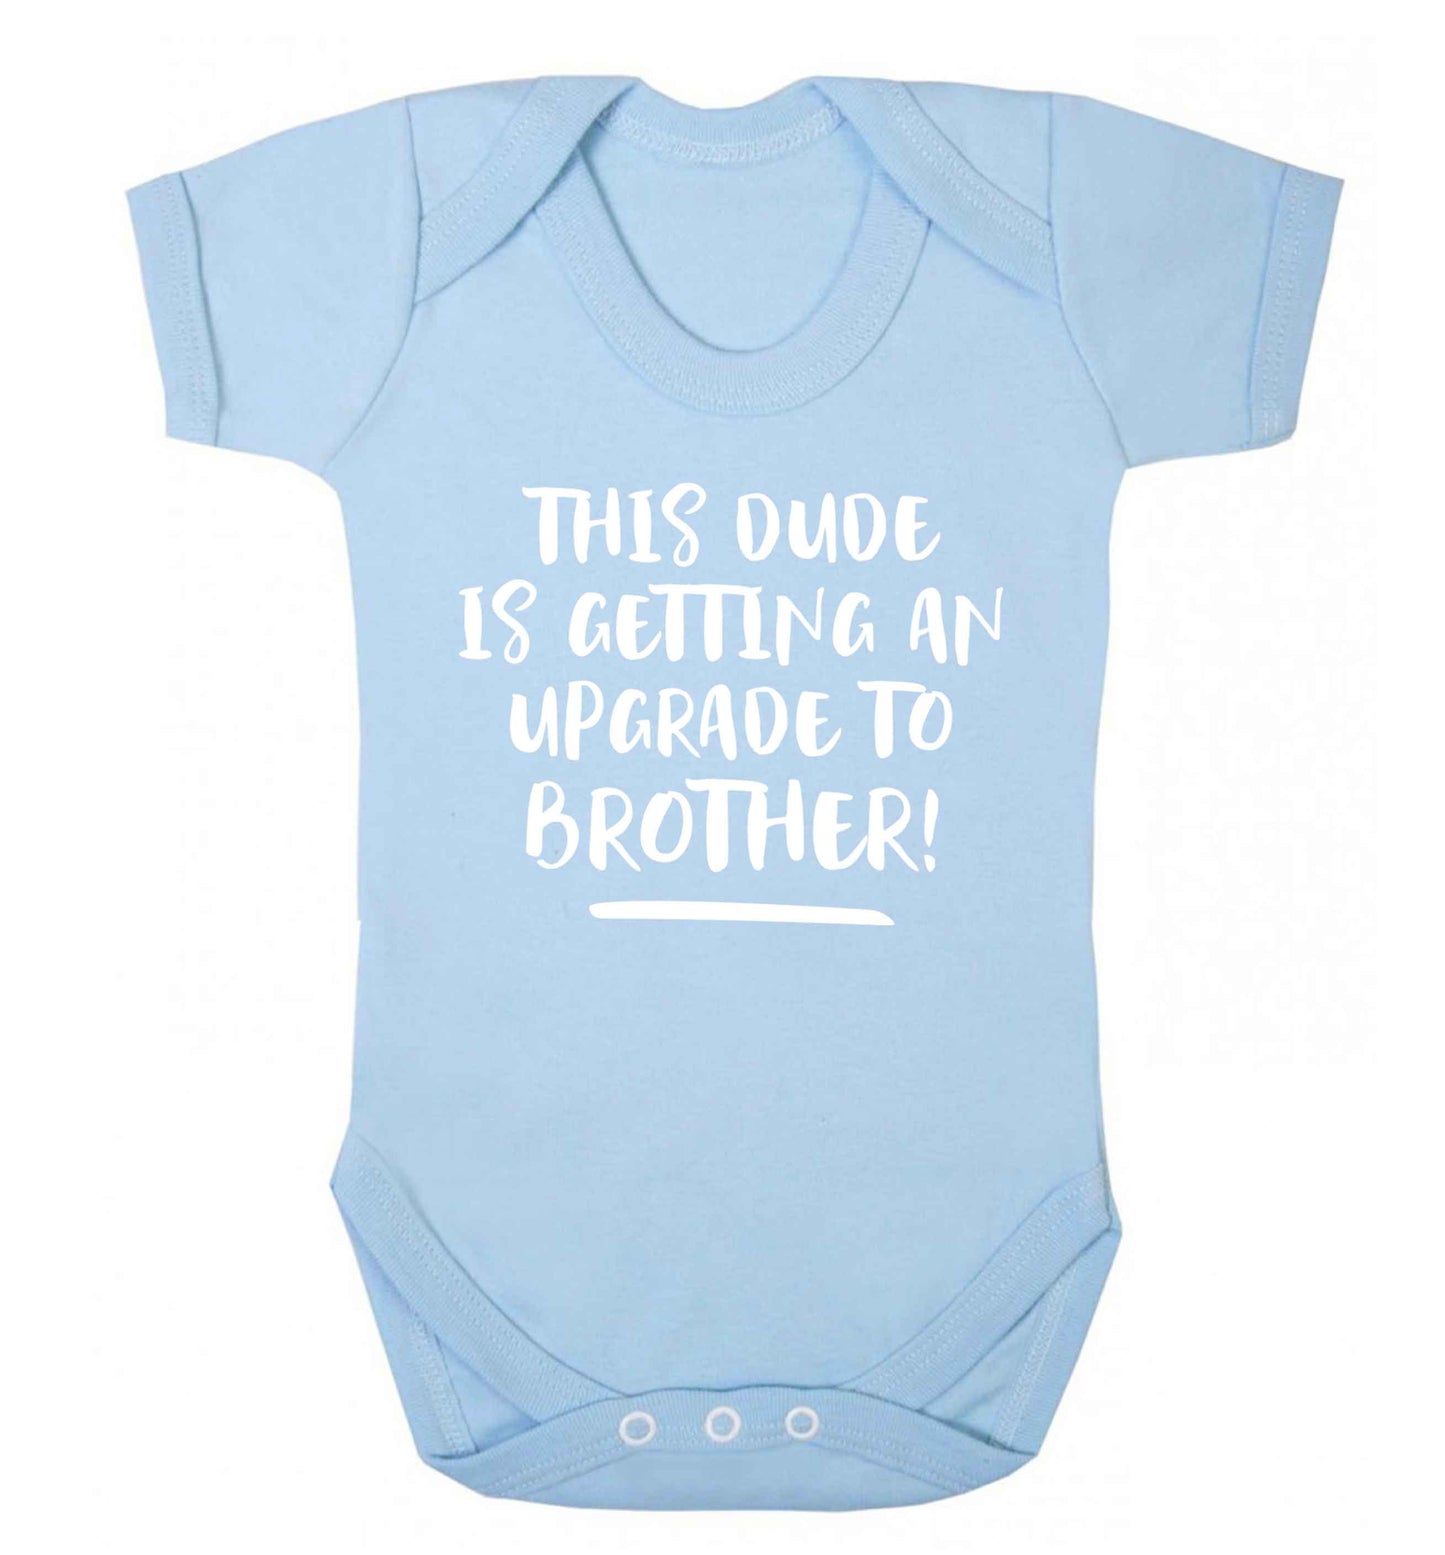 This dude is getting an upgrade to brother! Baby Vest pale blue 18-24 months